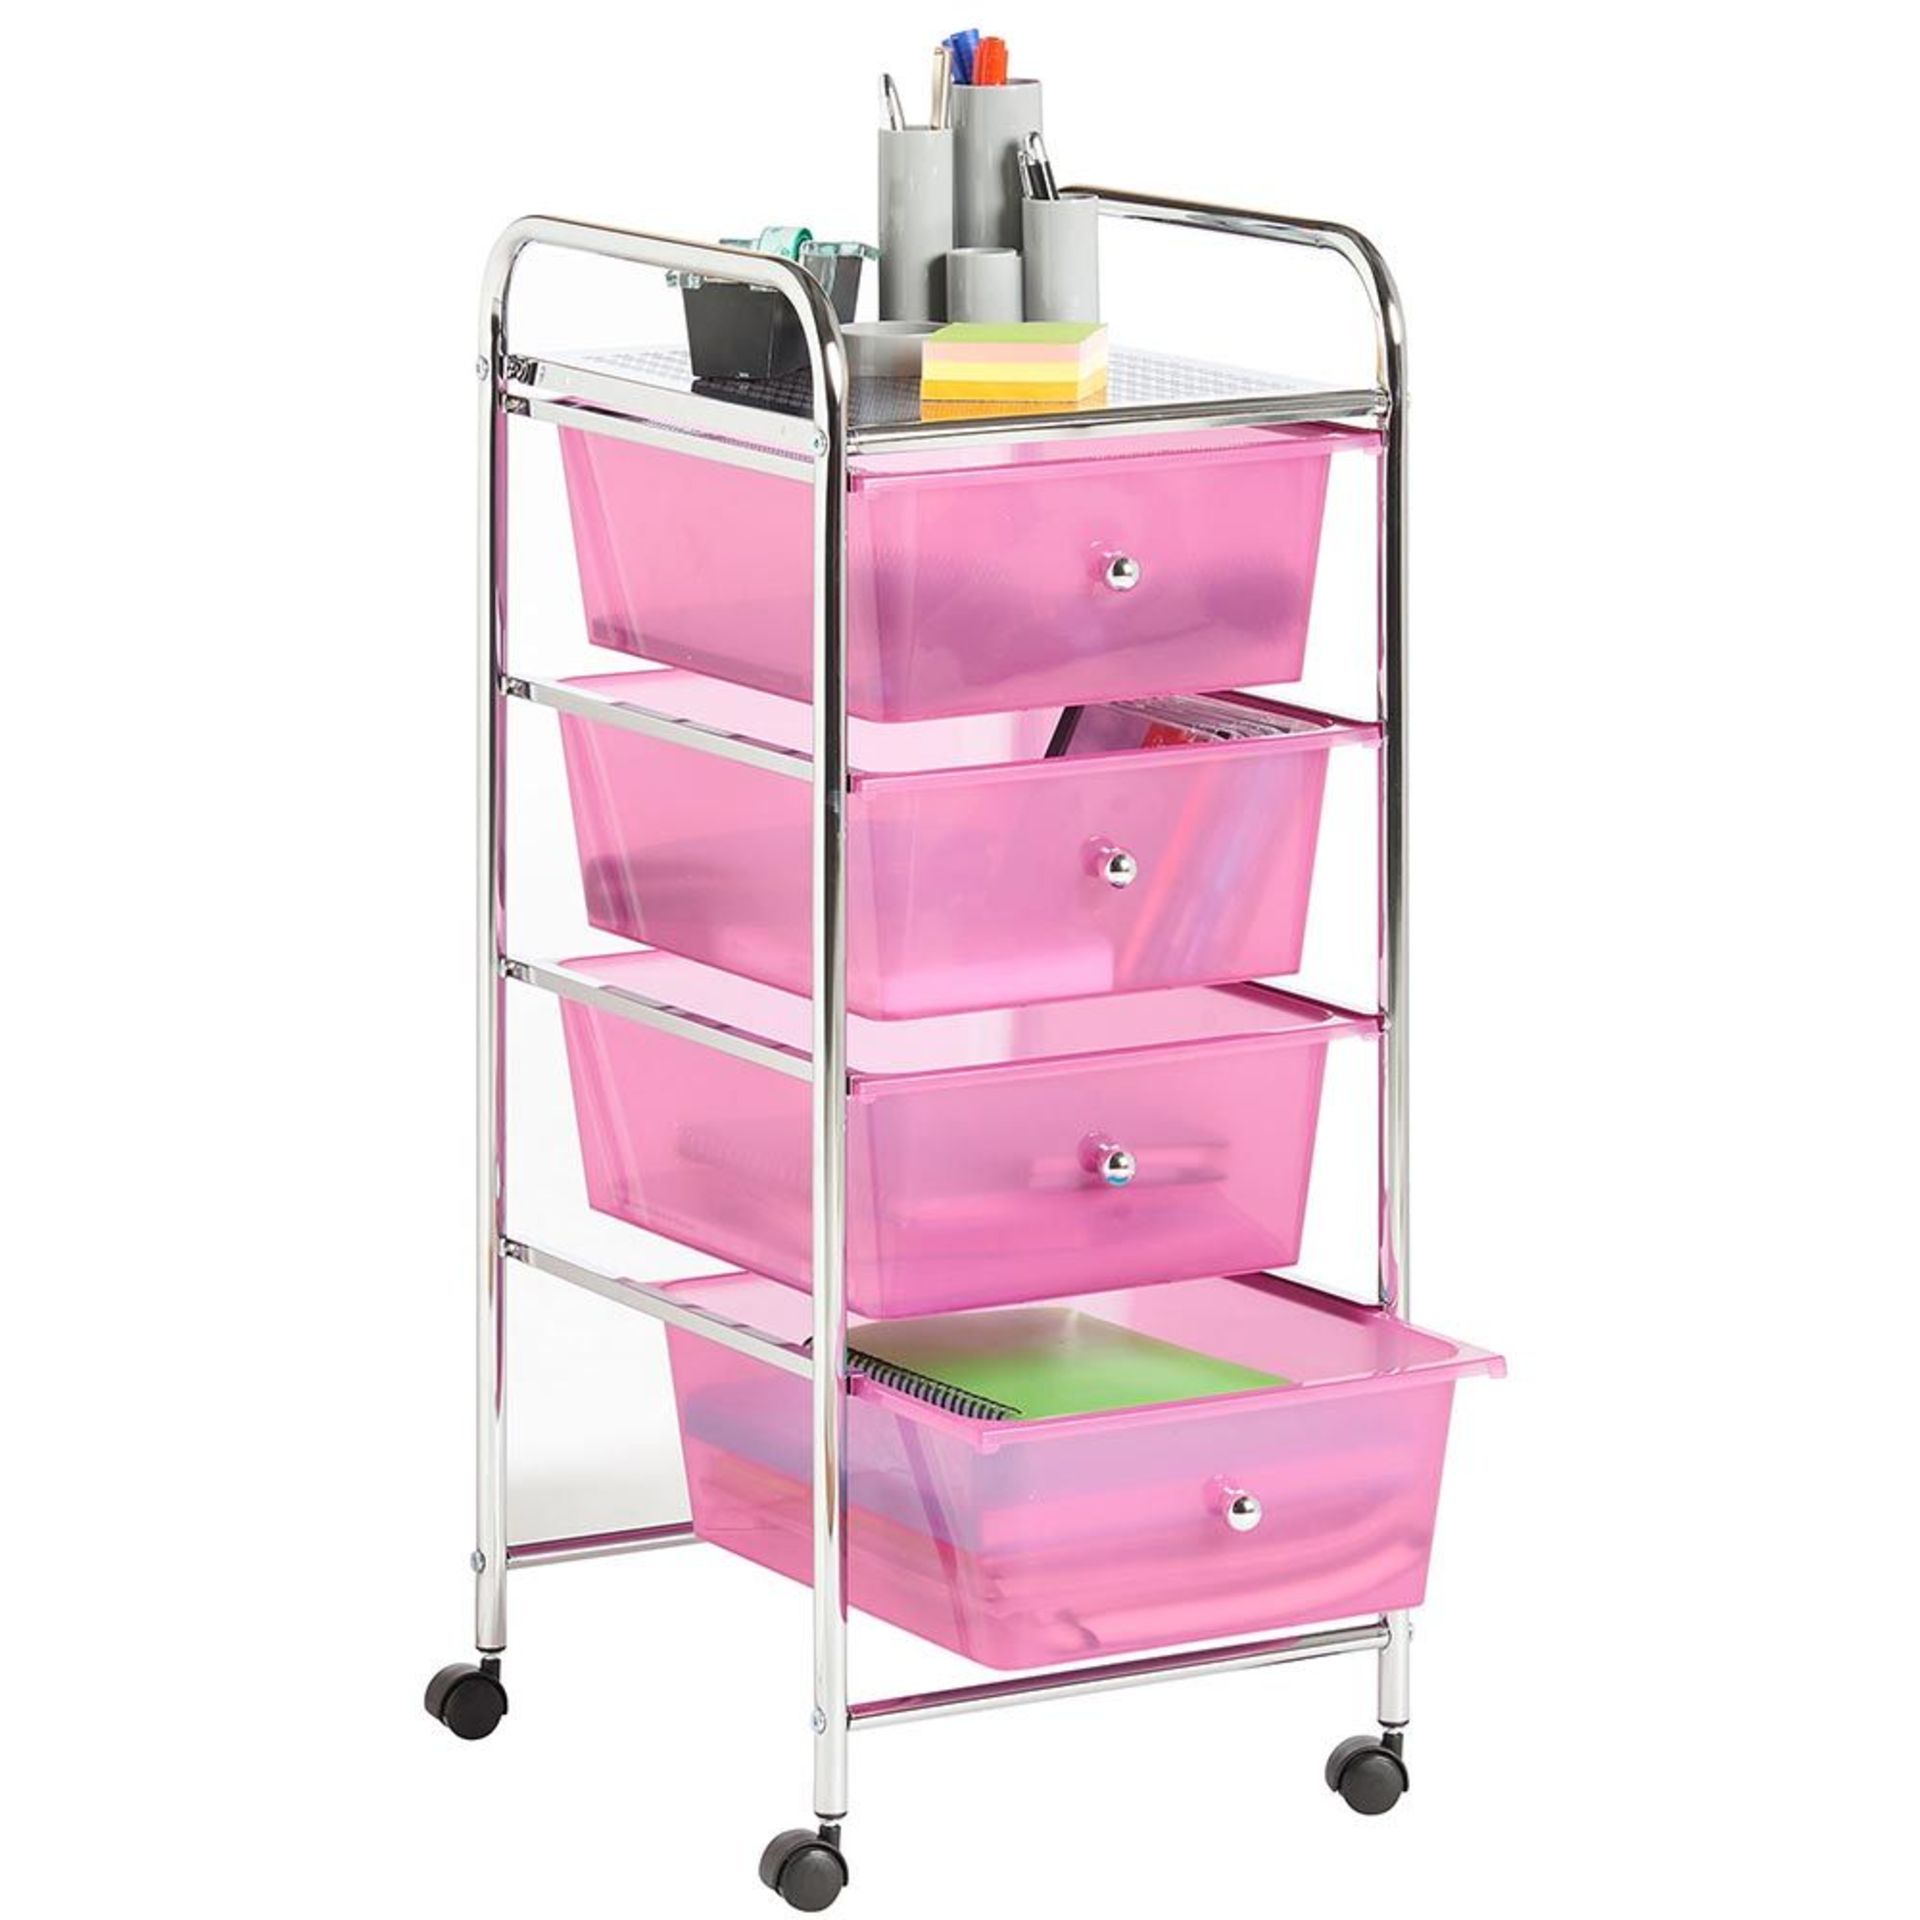 (V9) 4 Drawer Trolley - Pink Multi-purpose 4 drawer pink storage trolley - great for homes, of... - Image 4 of 4